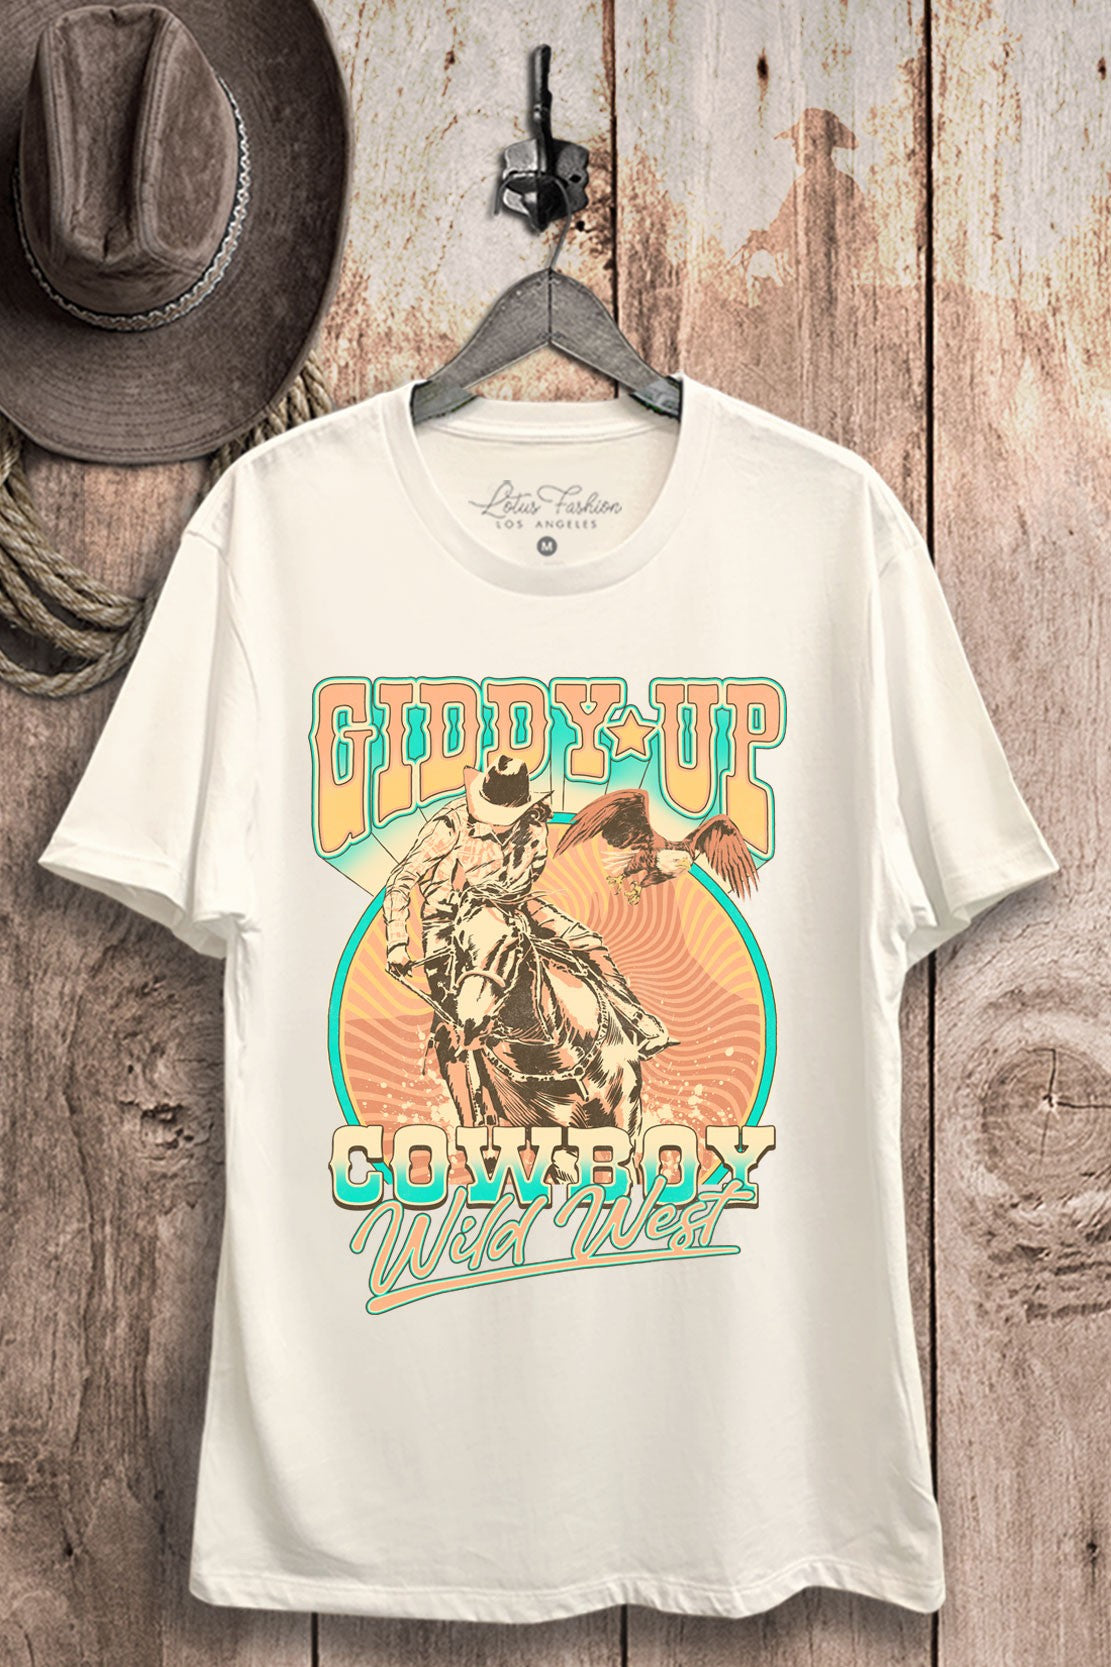 The Wild West Giddy Up